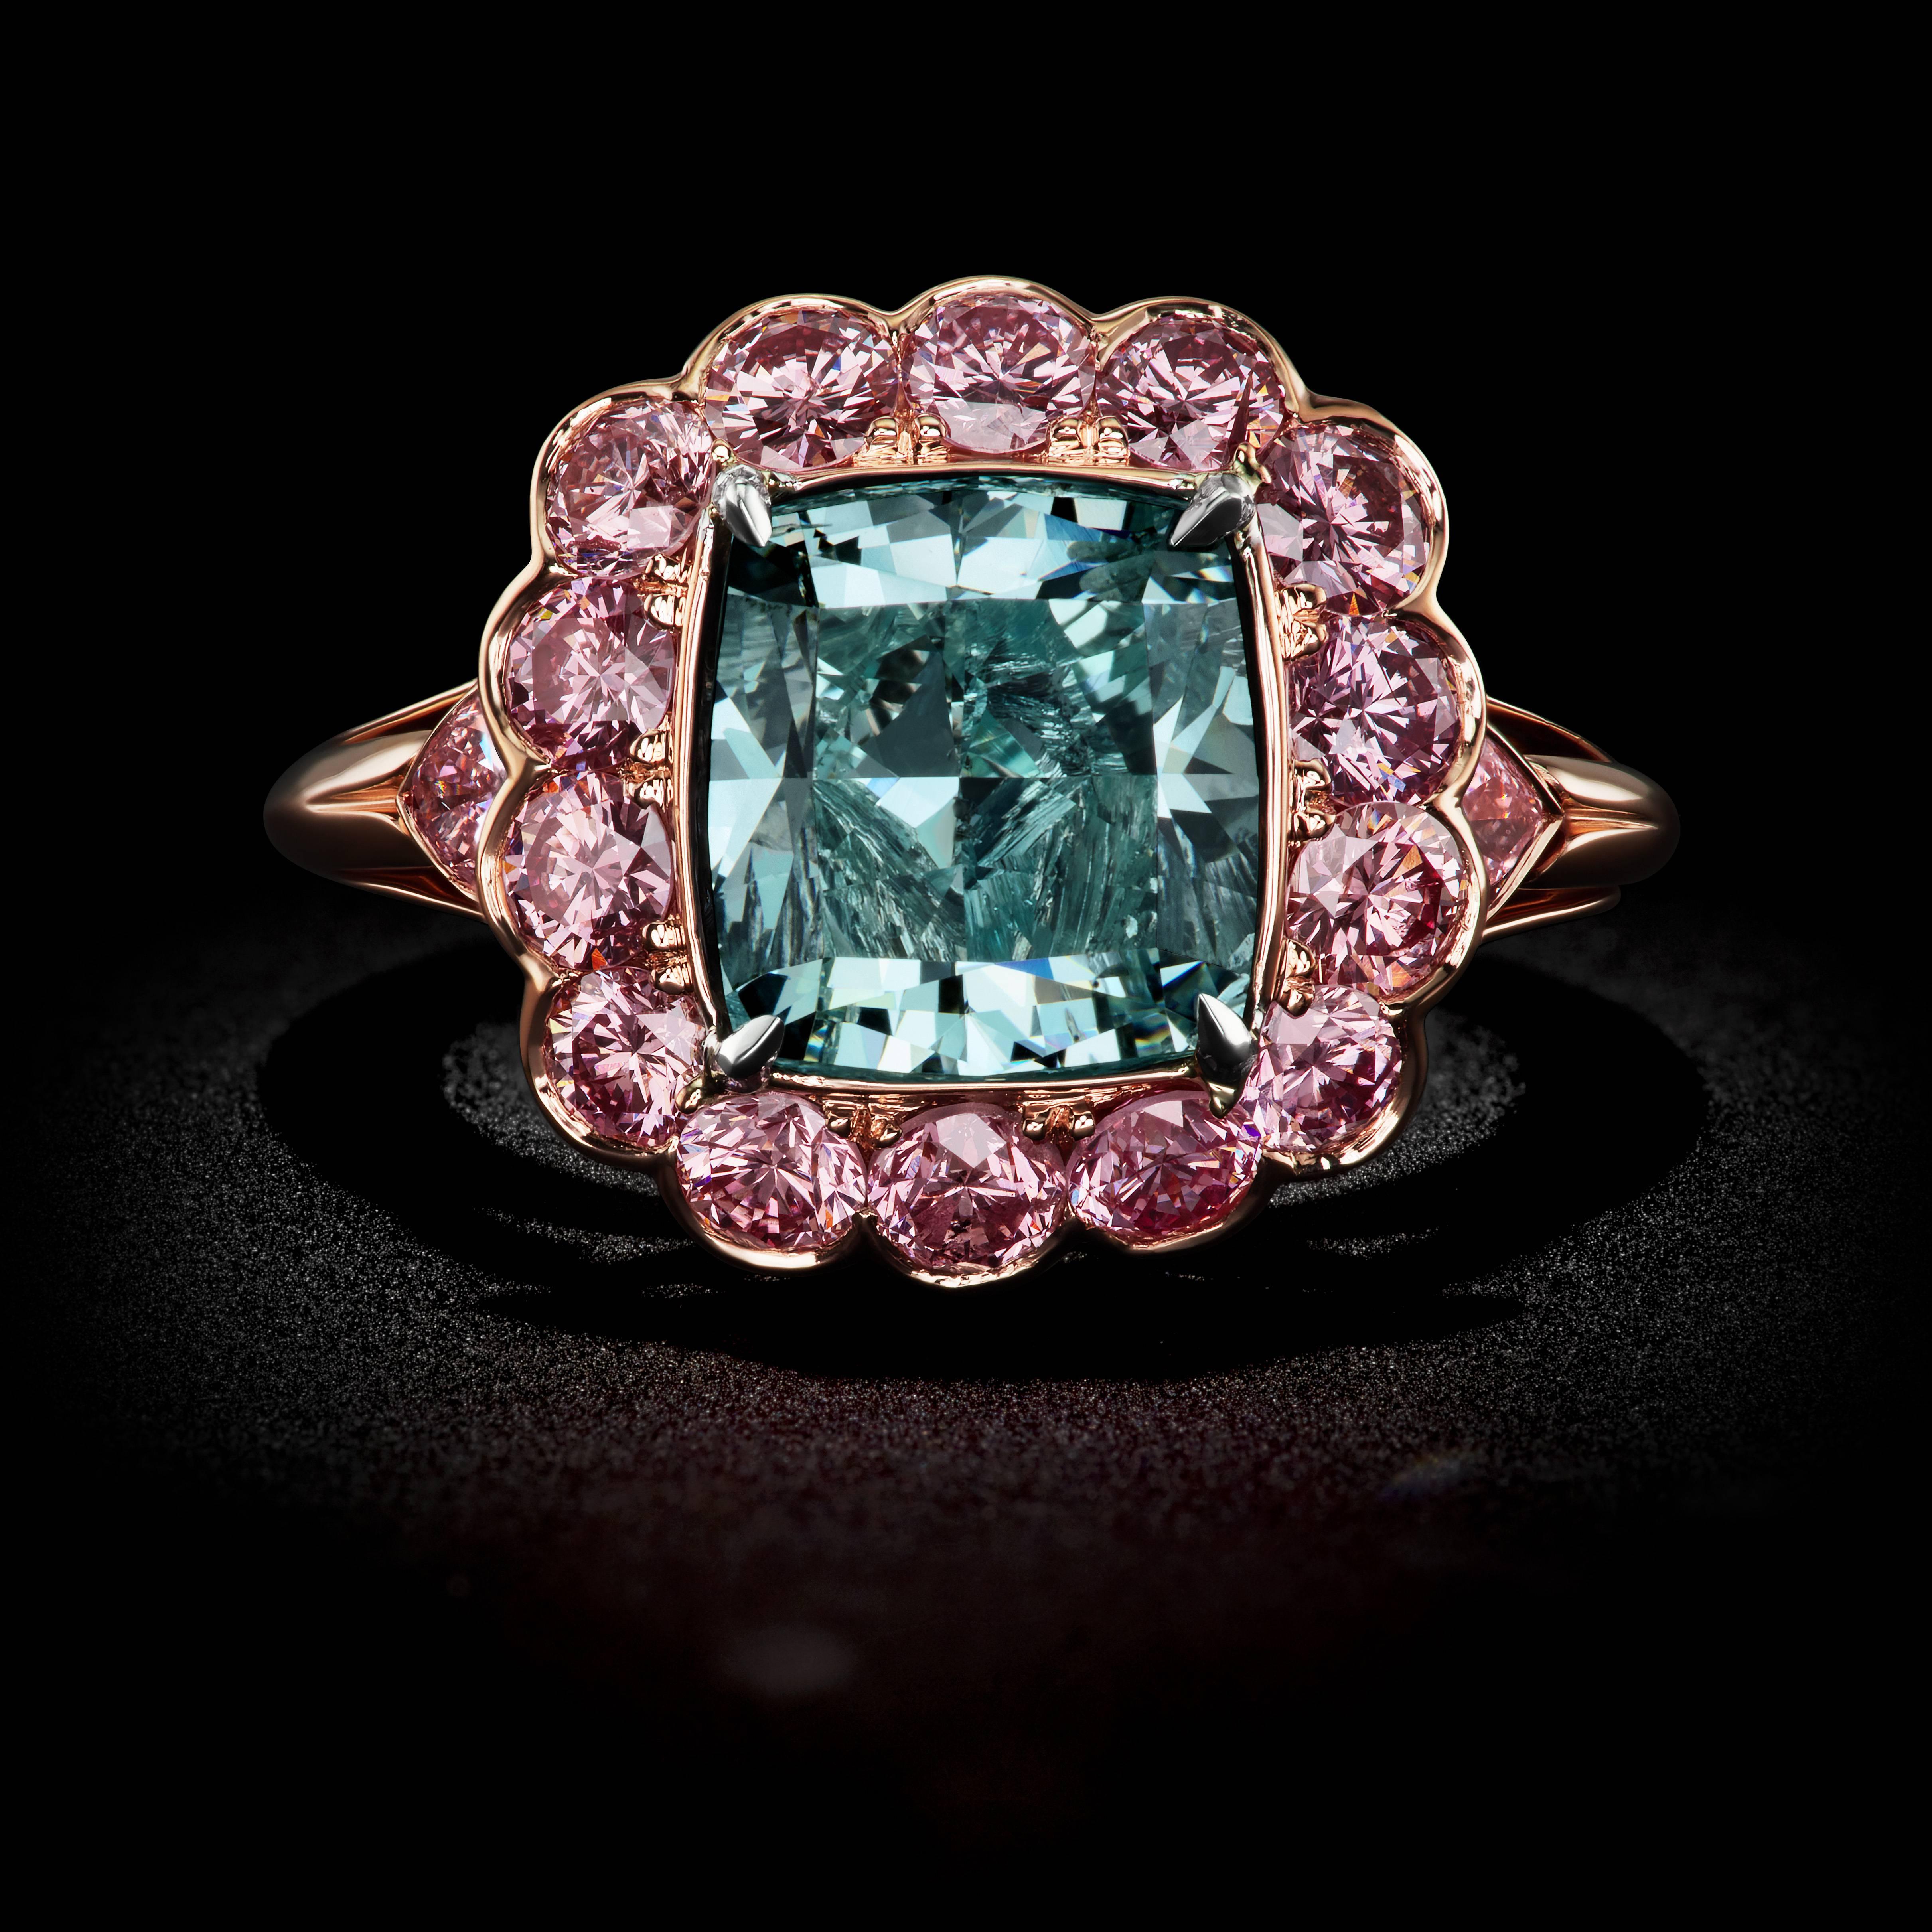 A Mesmerizing Fancy Intense Blueish Green Cushion Cut Diamond GIA Cert Ring by David Rosenberg.

This handmade 18kt Rose Gold Ring with a 4.16ct Cushion Cut Fancy Intense Blueish Green Diamond is accompanied with a GIA Certificate and a Stephen